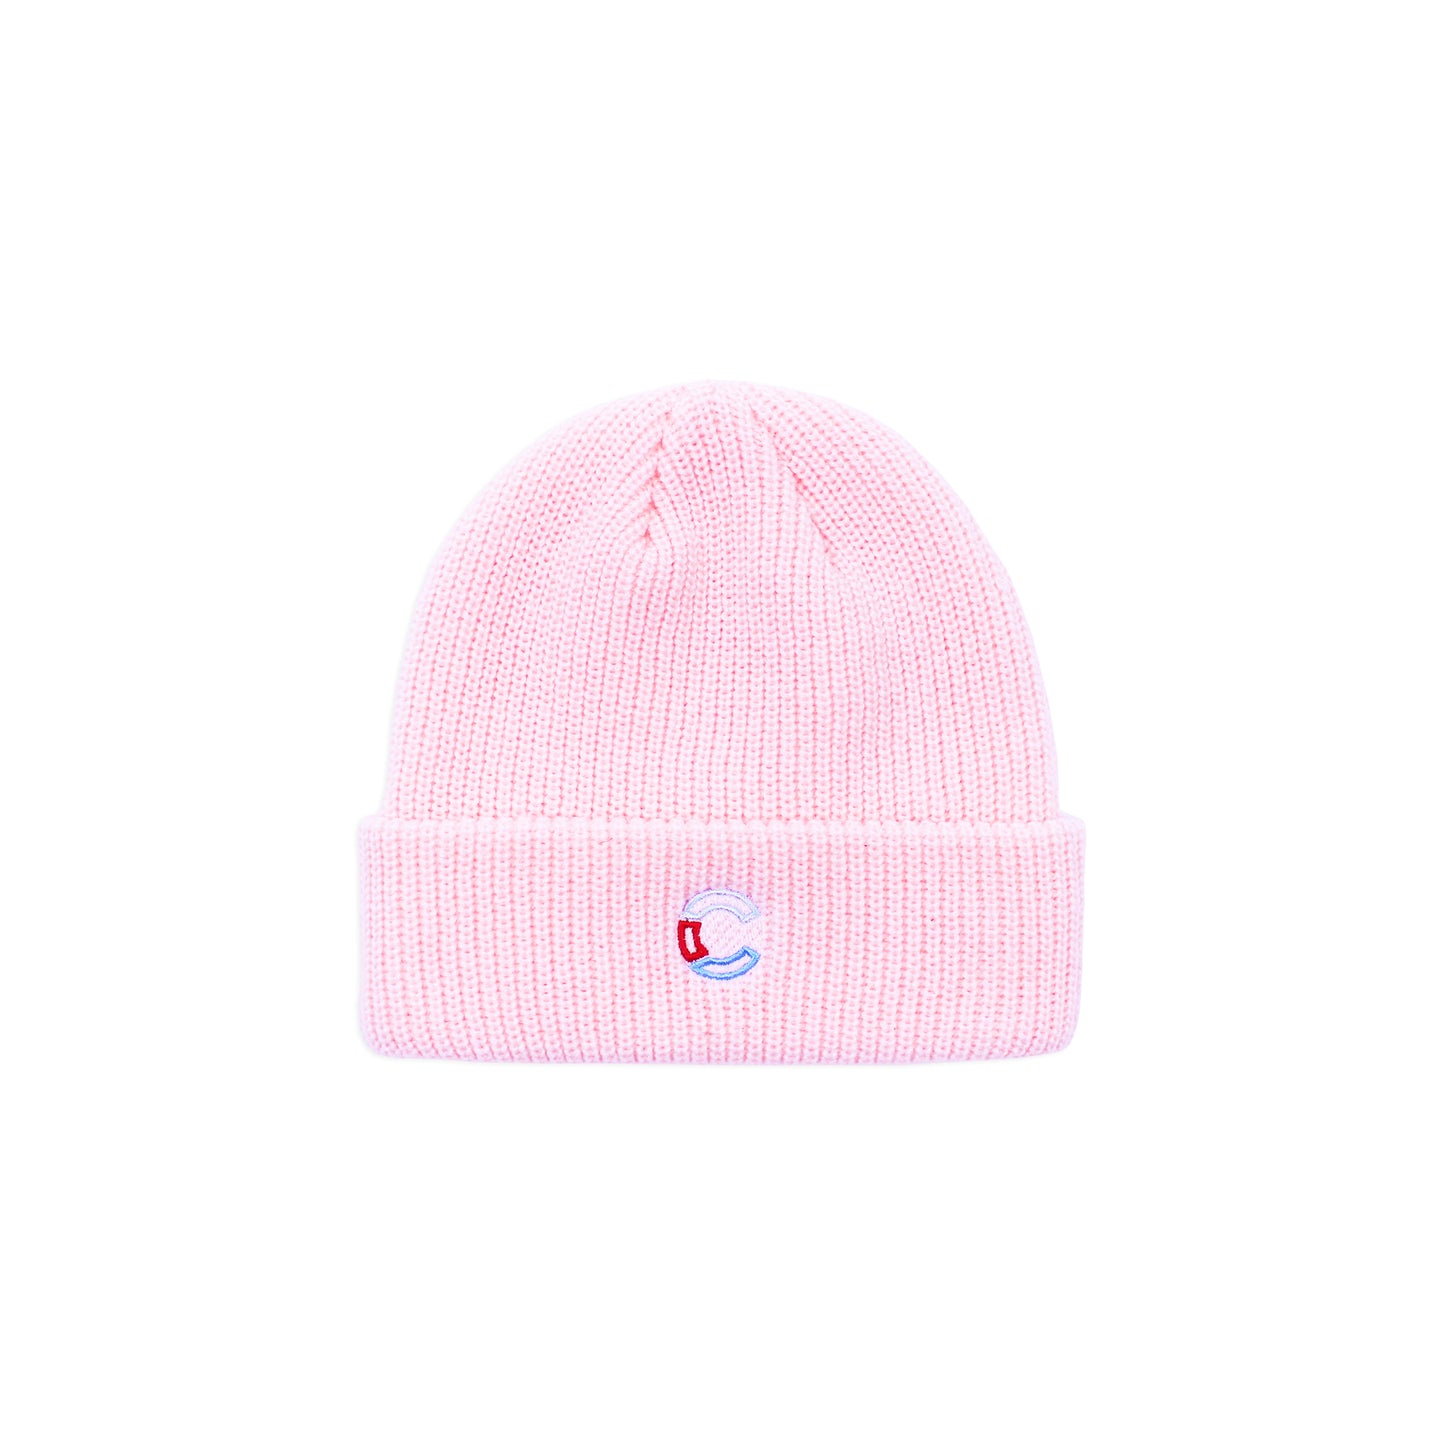 C Beanie Pink | Pink Beanie | the CRATE ny